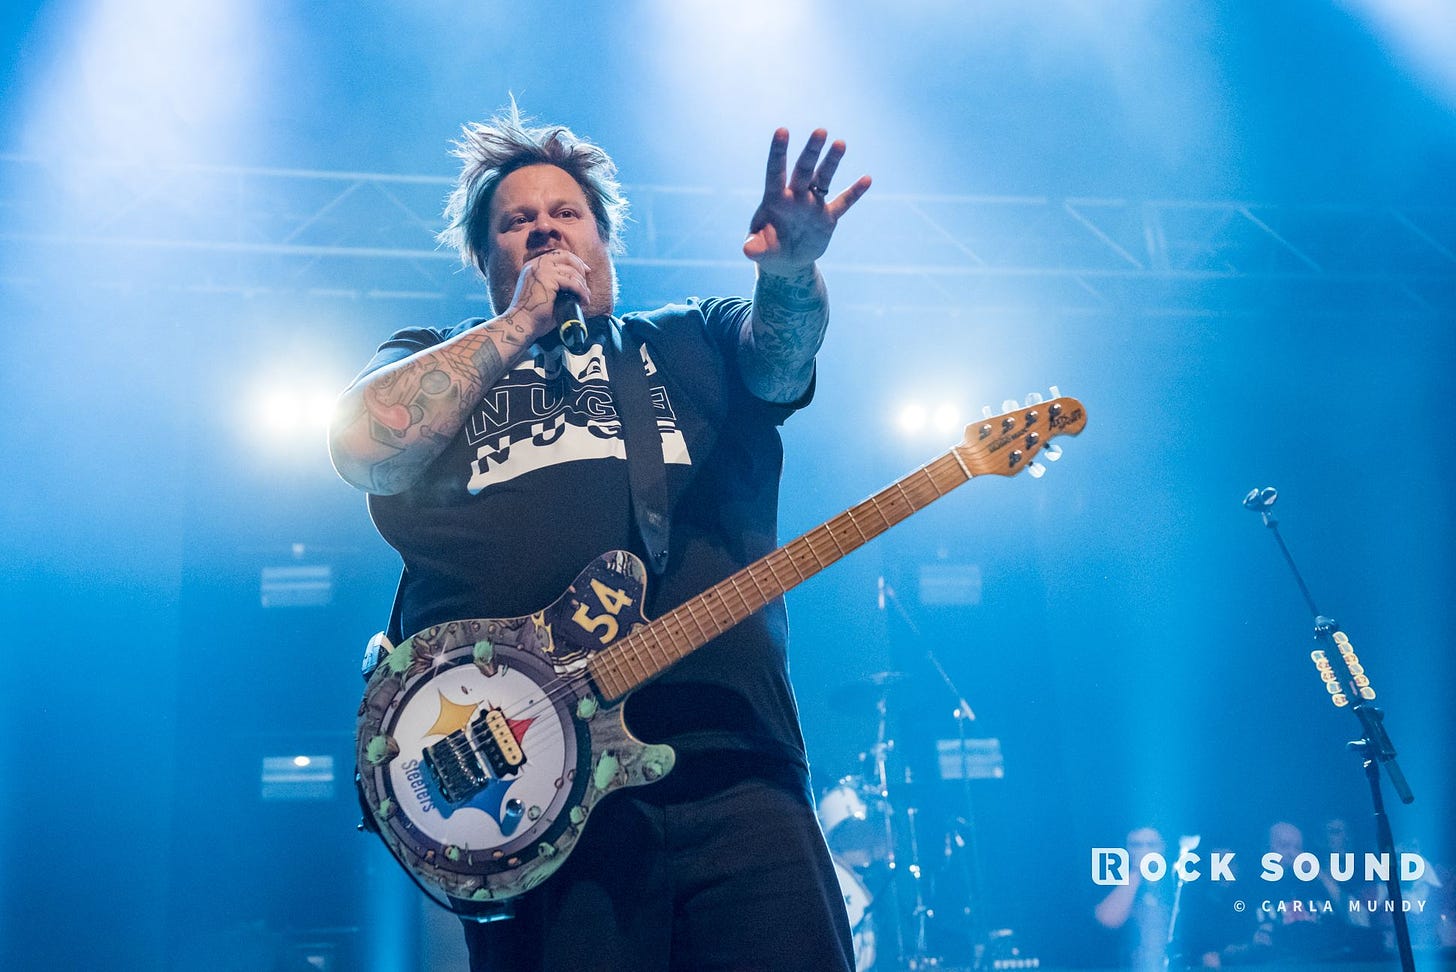 Rock Sound on Twitter: "Bowling For Soup's Jaret Reddick is livestreaming  some special acoustic shows https://t.co/fIcJhruBKc  https://t.co/v5mQbP3eaF" / Twitter